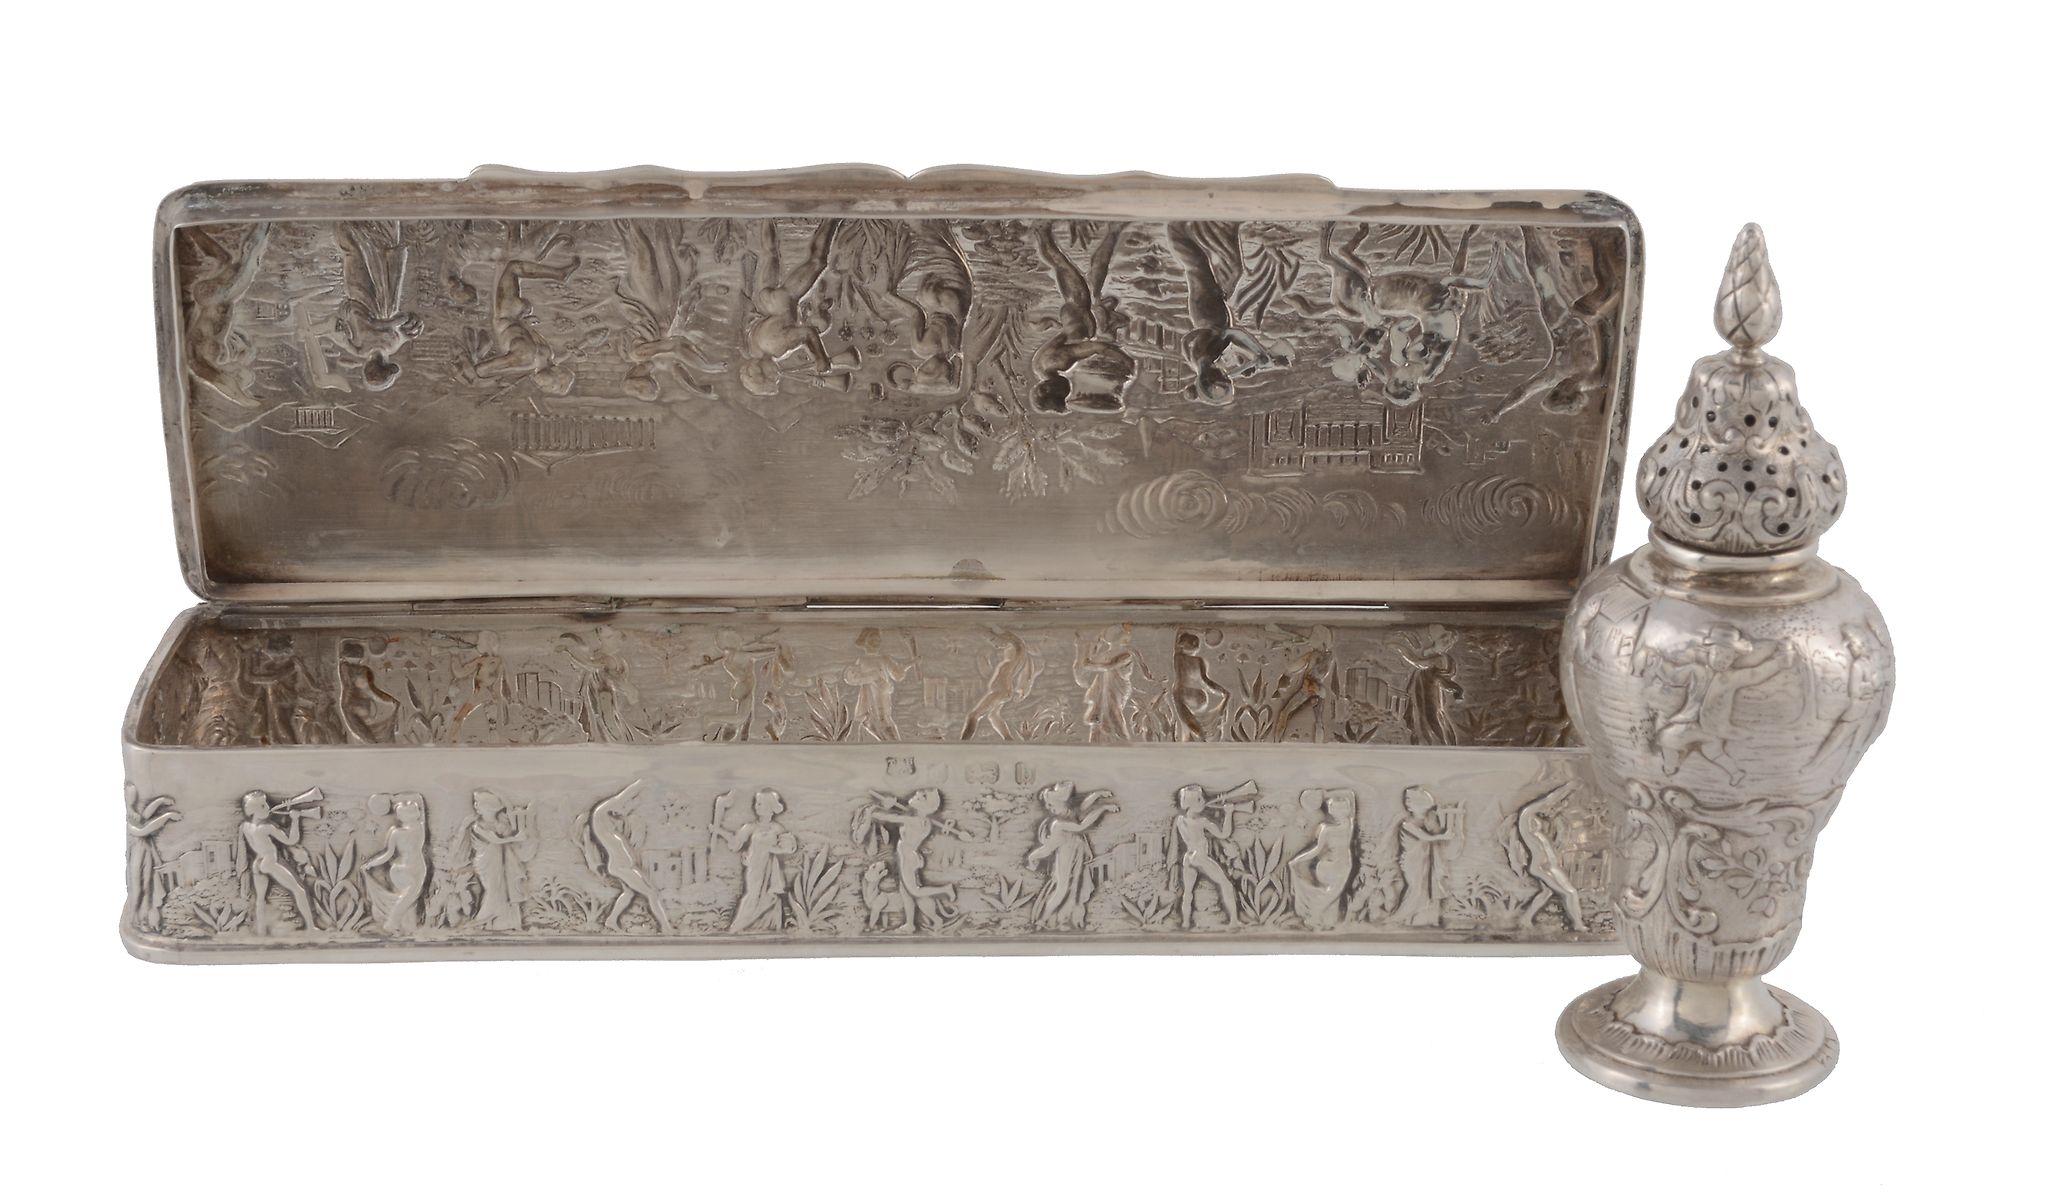 An Edwardian silver rectangular table box by T. H. Hazlewood & Co., Birmingham 1901, embossed with